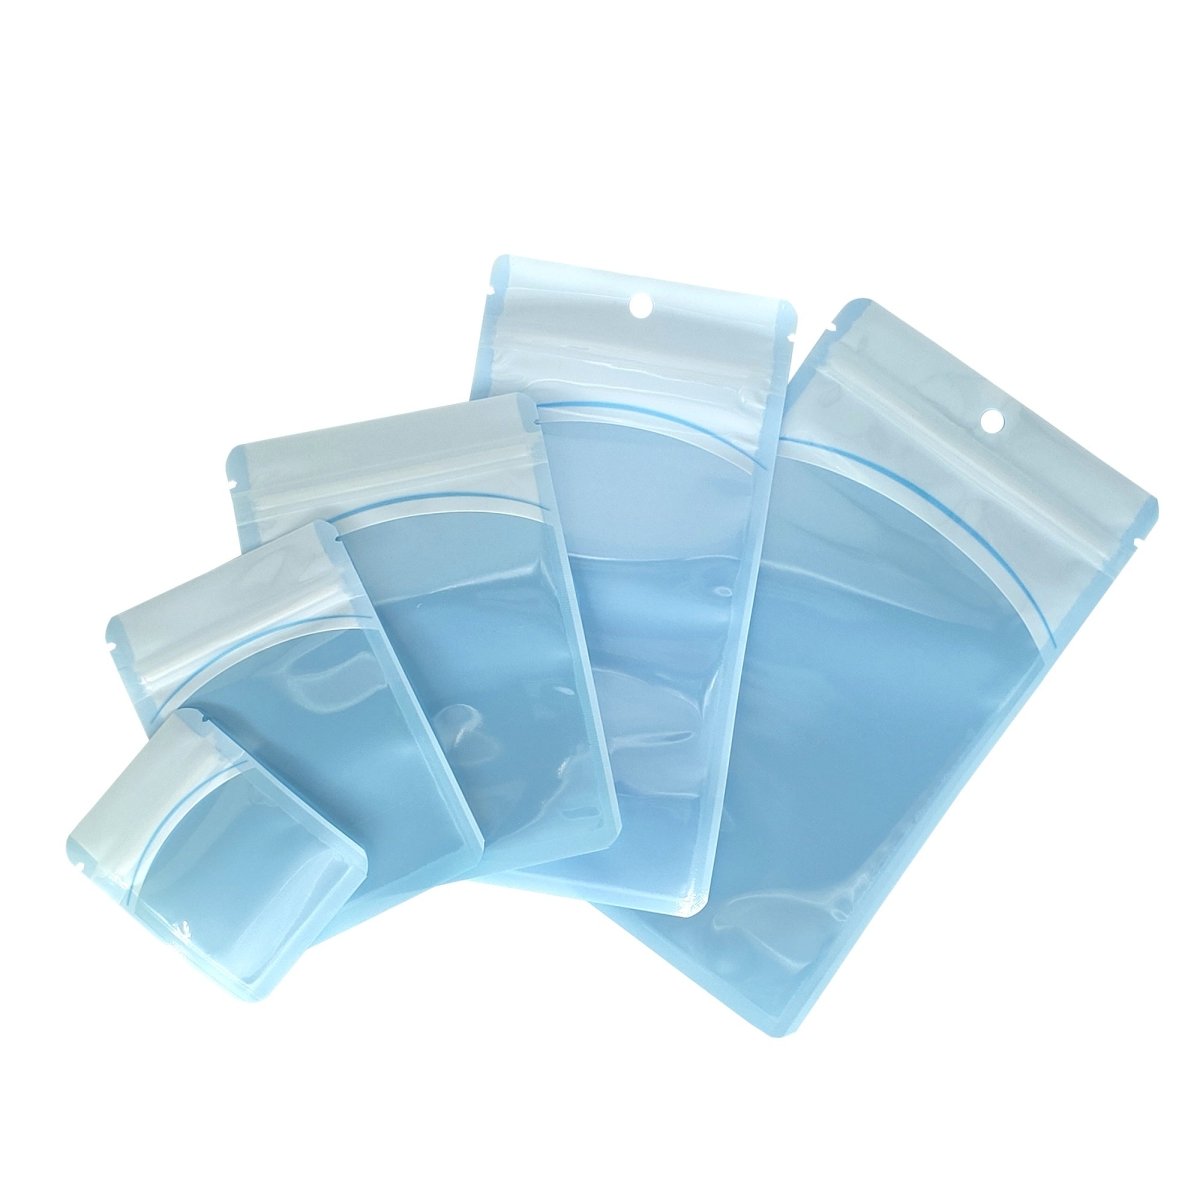 Glossy Transparent Bordered Window Design Plastic Bags with Hang Hole - Katady packaging